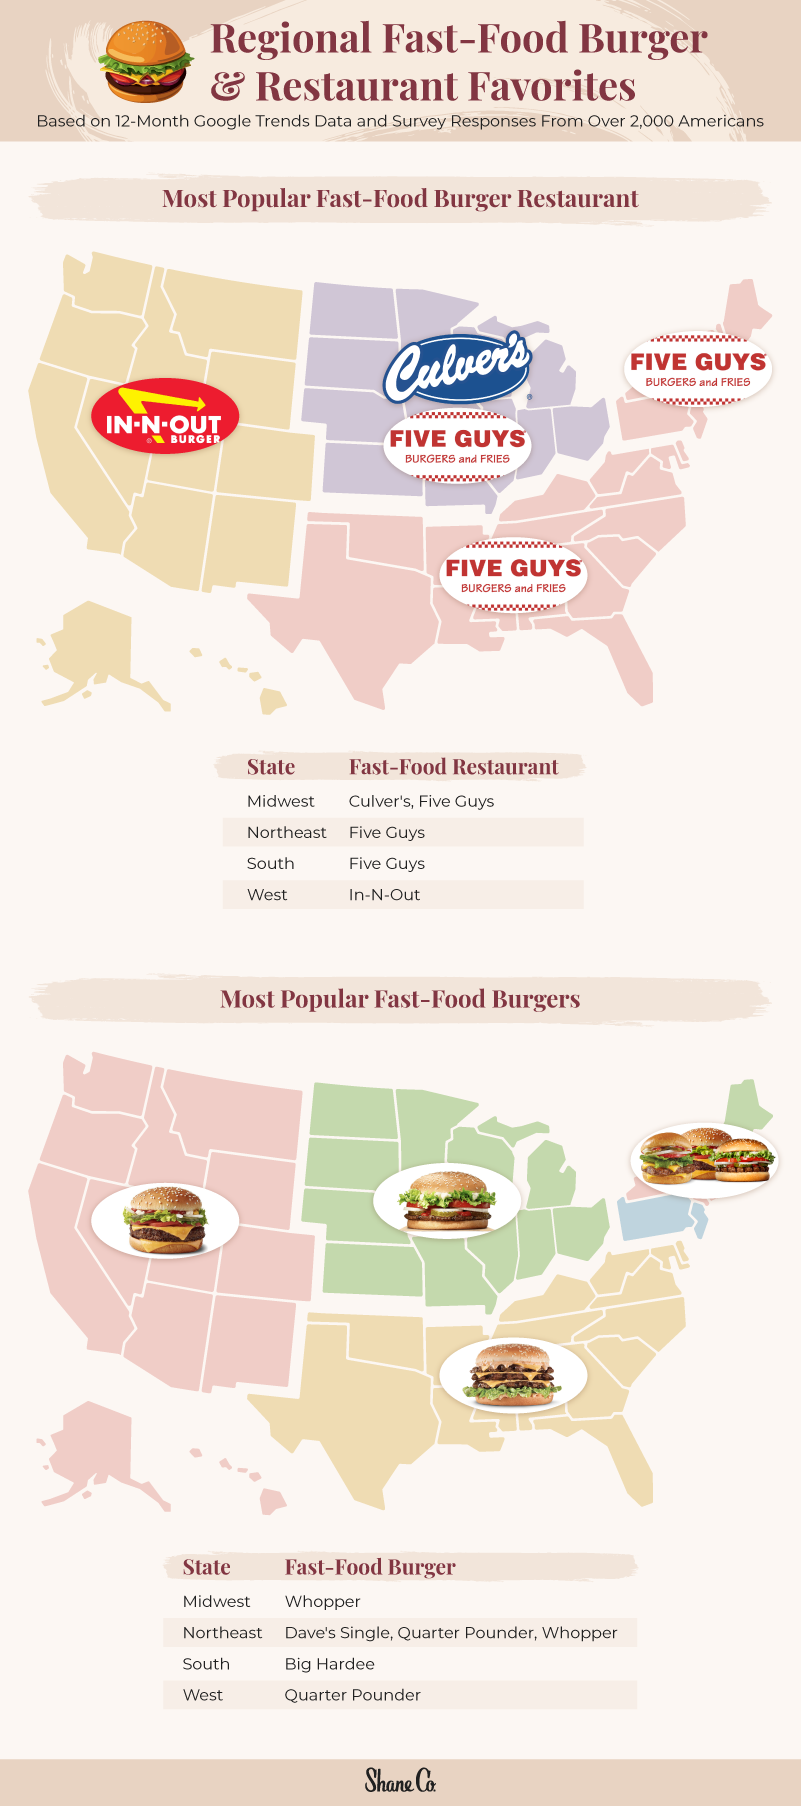 A U.S. map showing the regional preferences of fast-food burgers